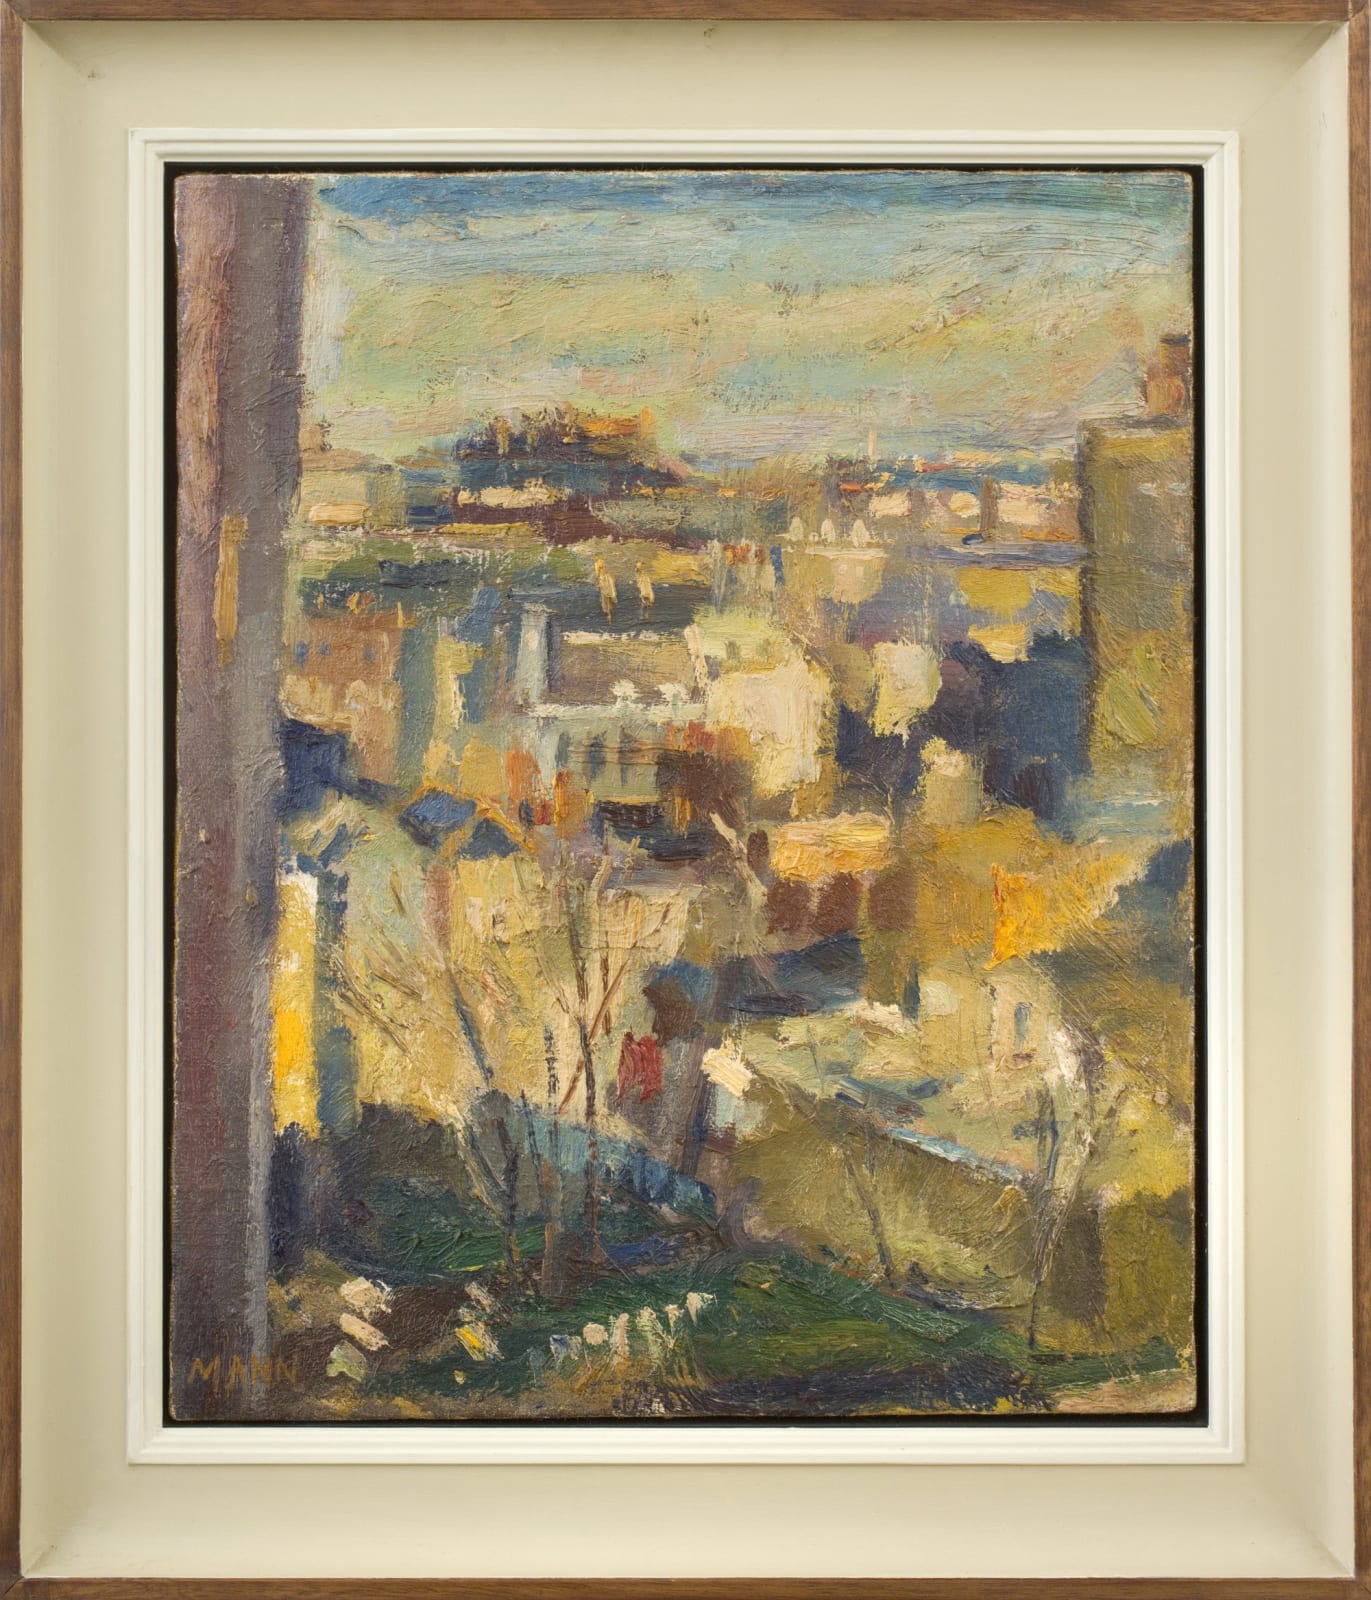 Cyril Mann, View from Bevin Court, 1960 c.